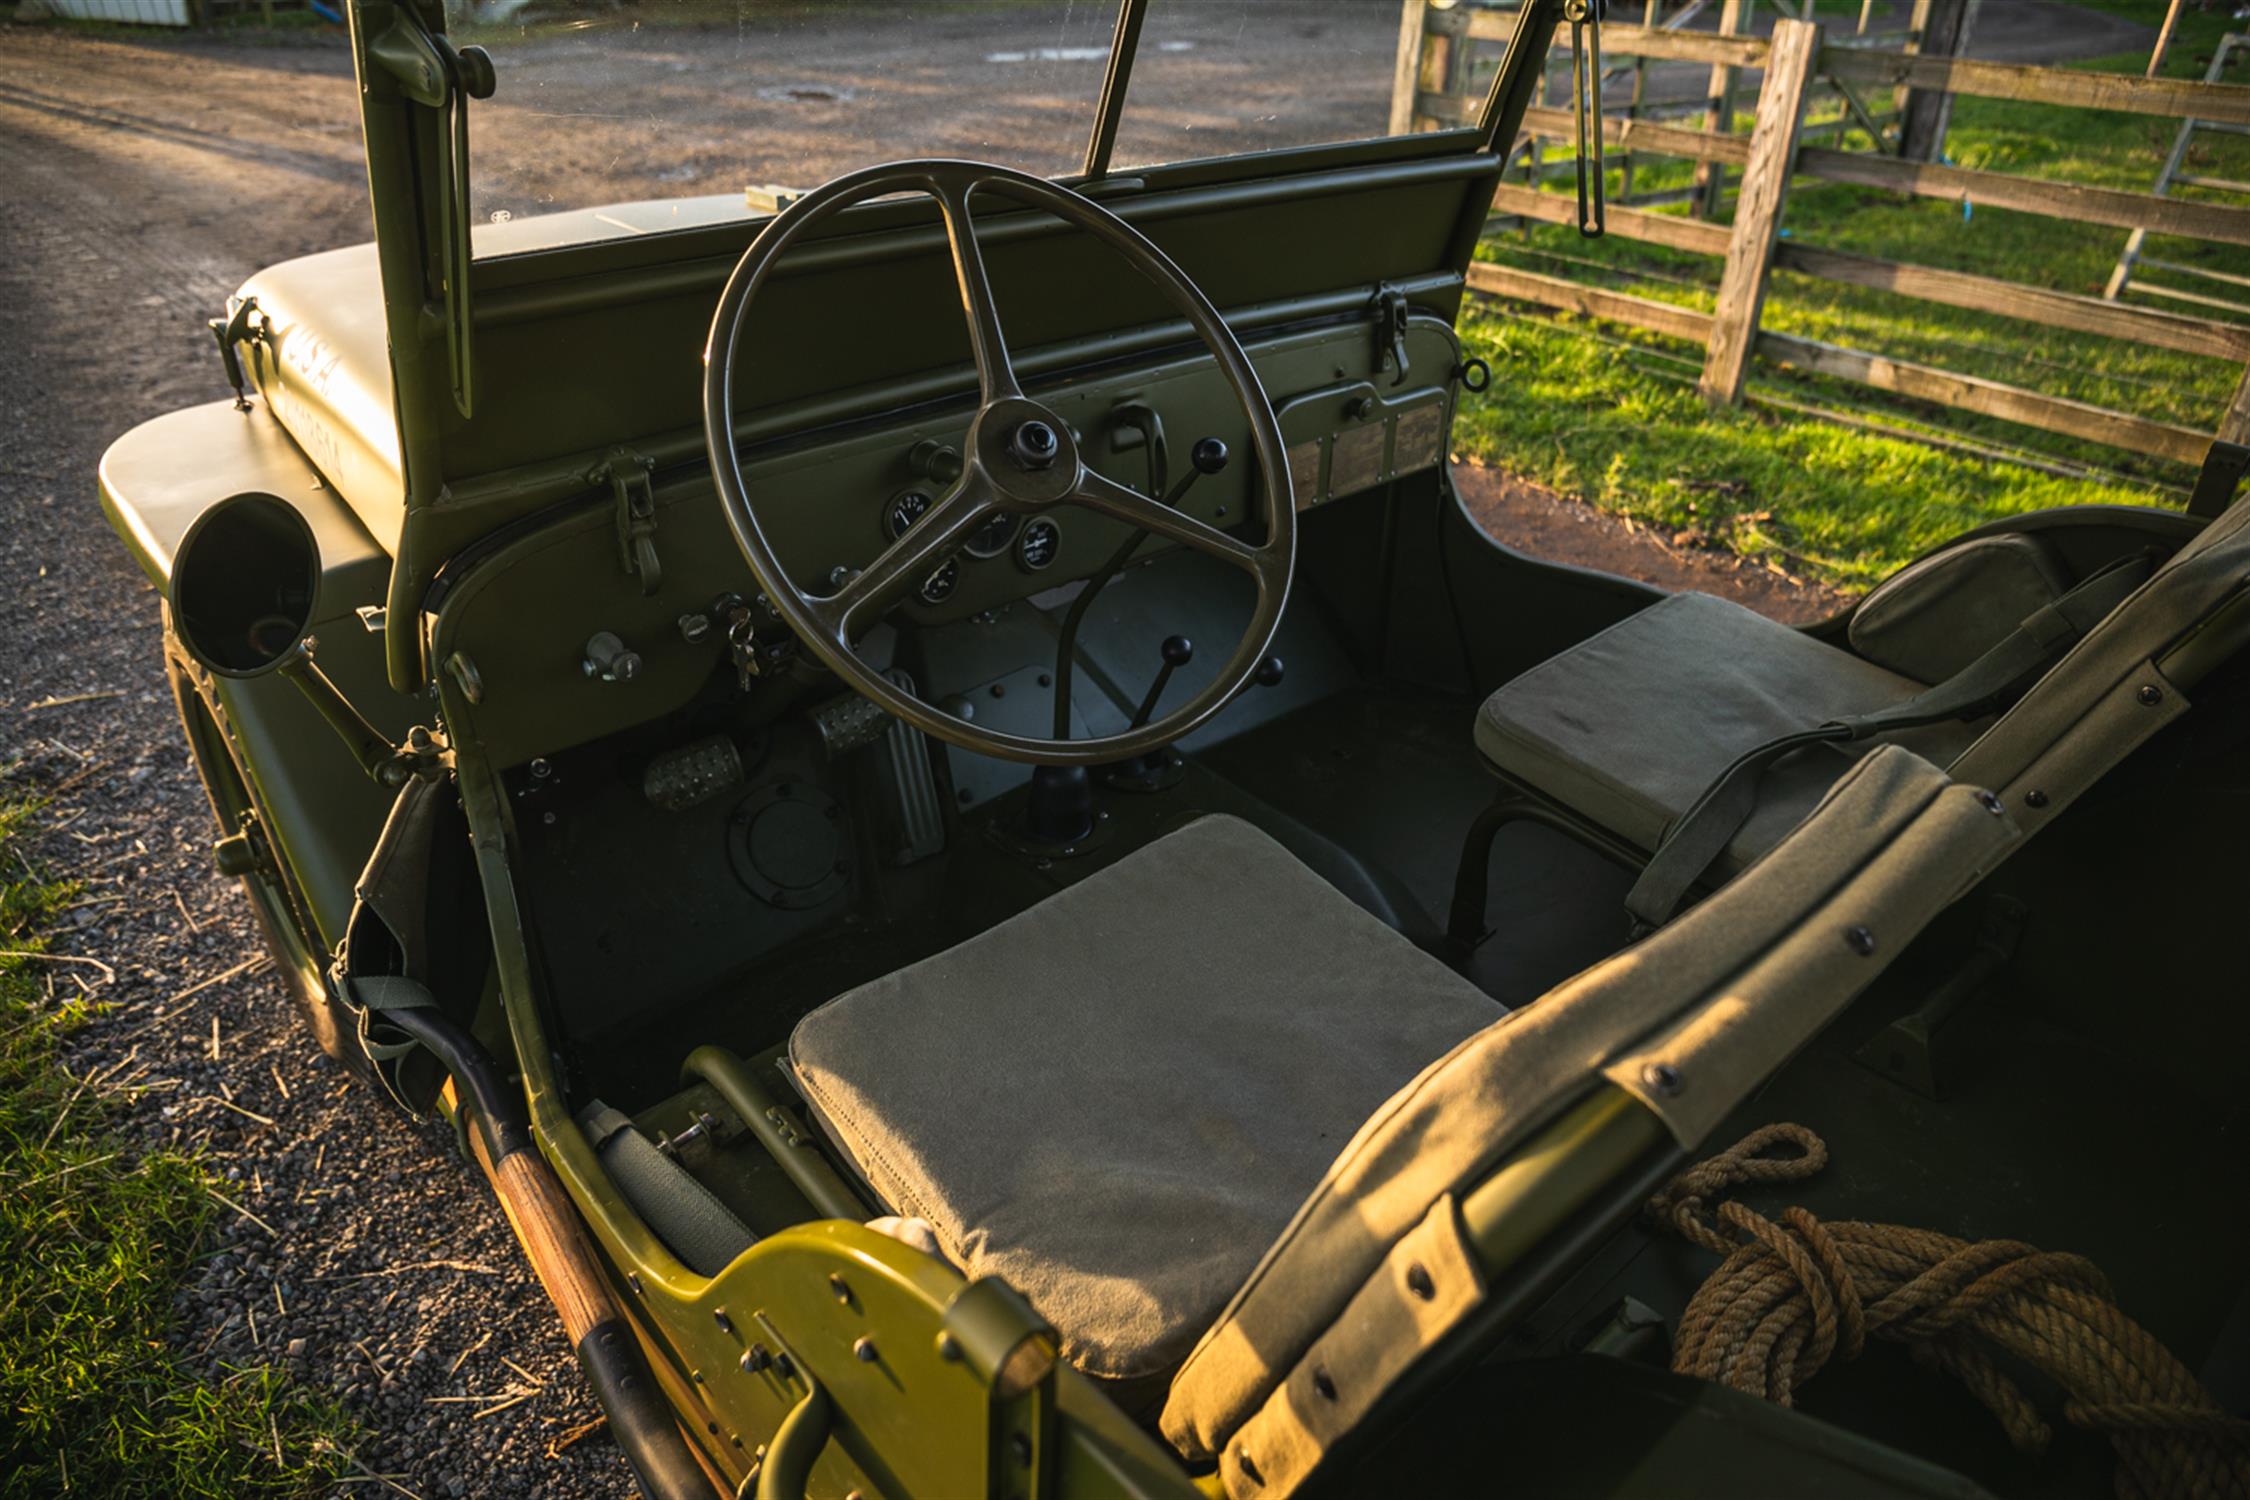 1942 Ford GPW Jeep - King George VI - Image 2 of 10